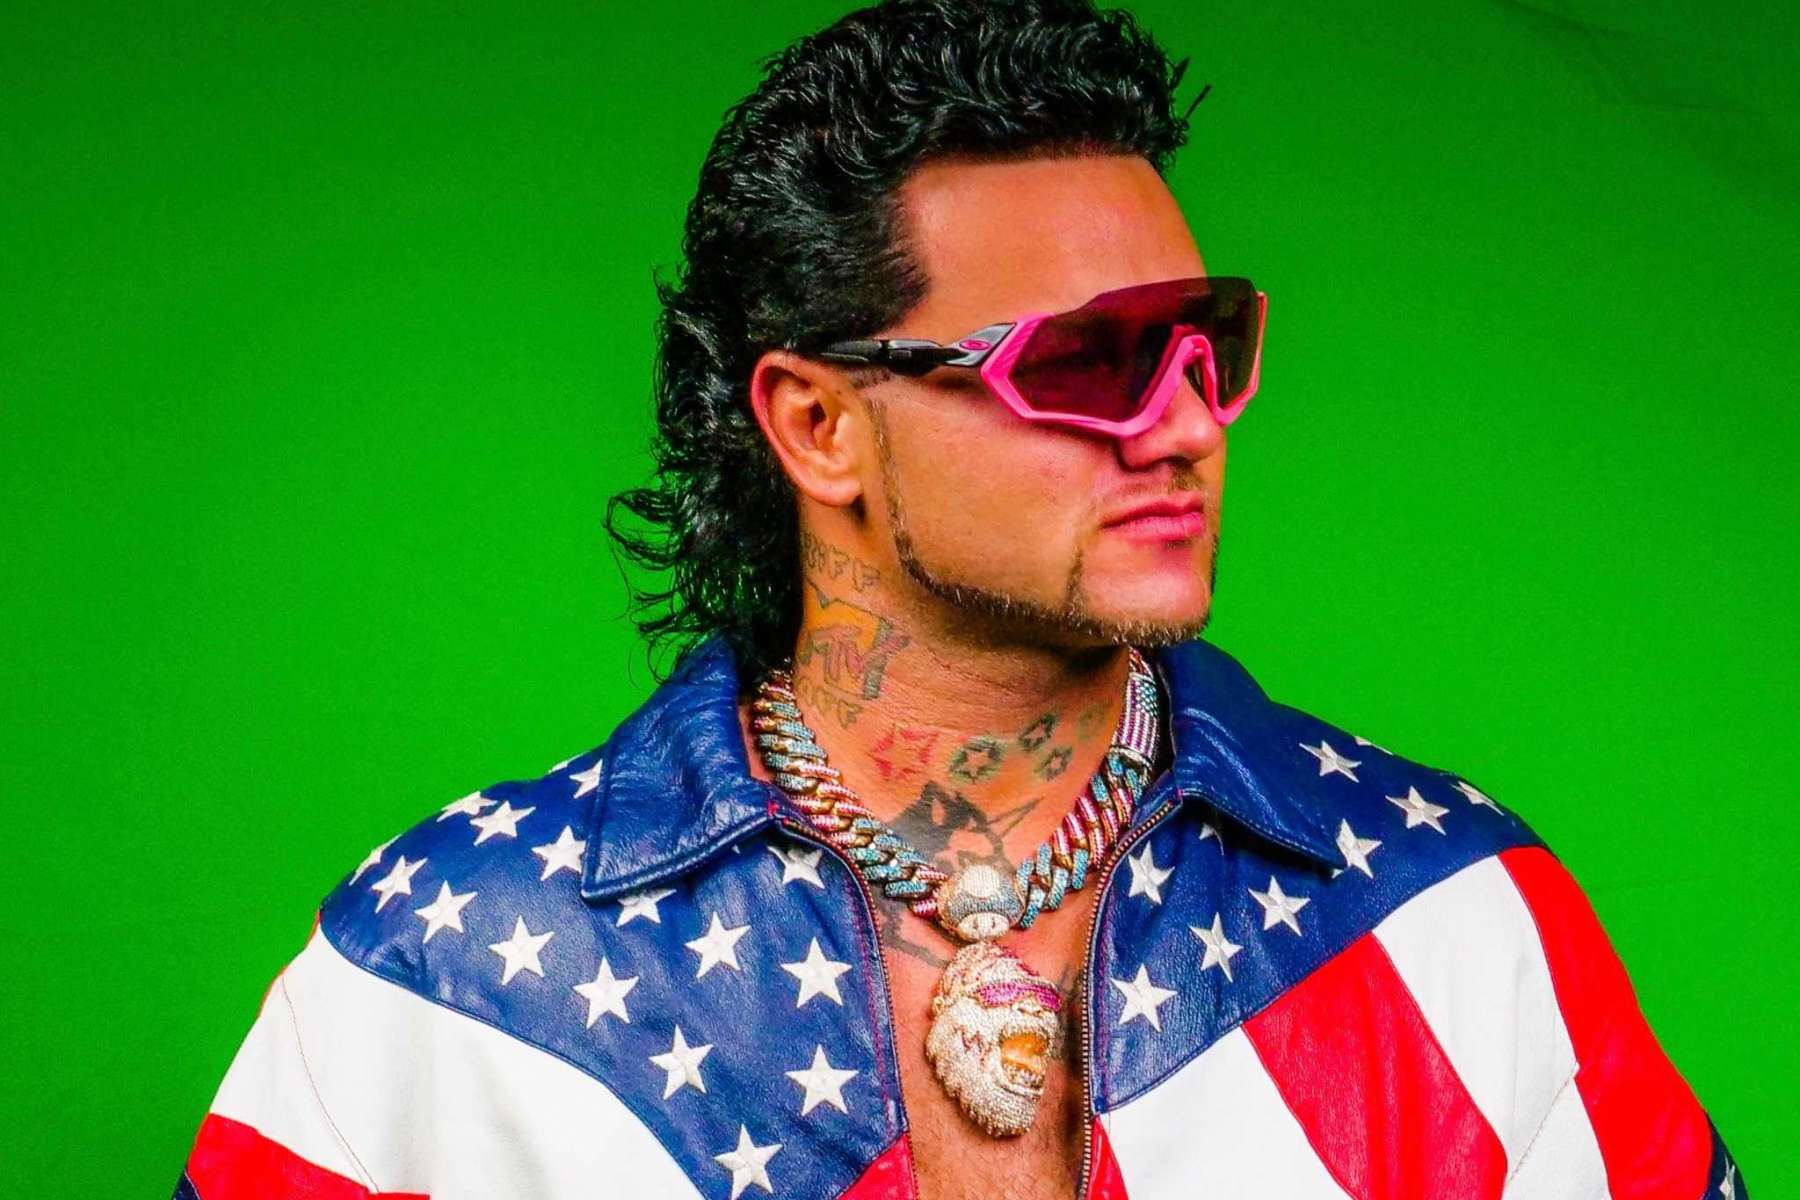 Premiere: 'What Does it Mean to be a Queen' from Houston rapper Riff Raff's 'Pink Python' album